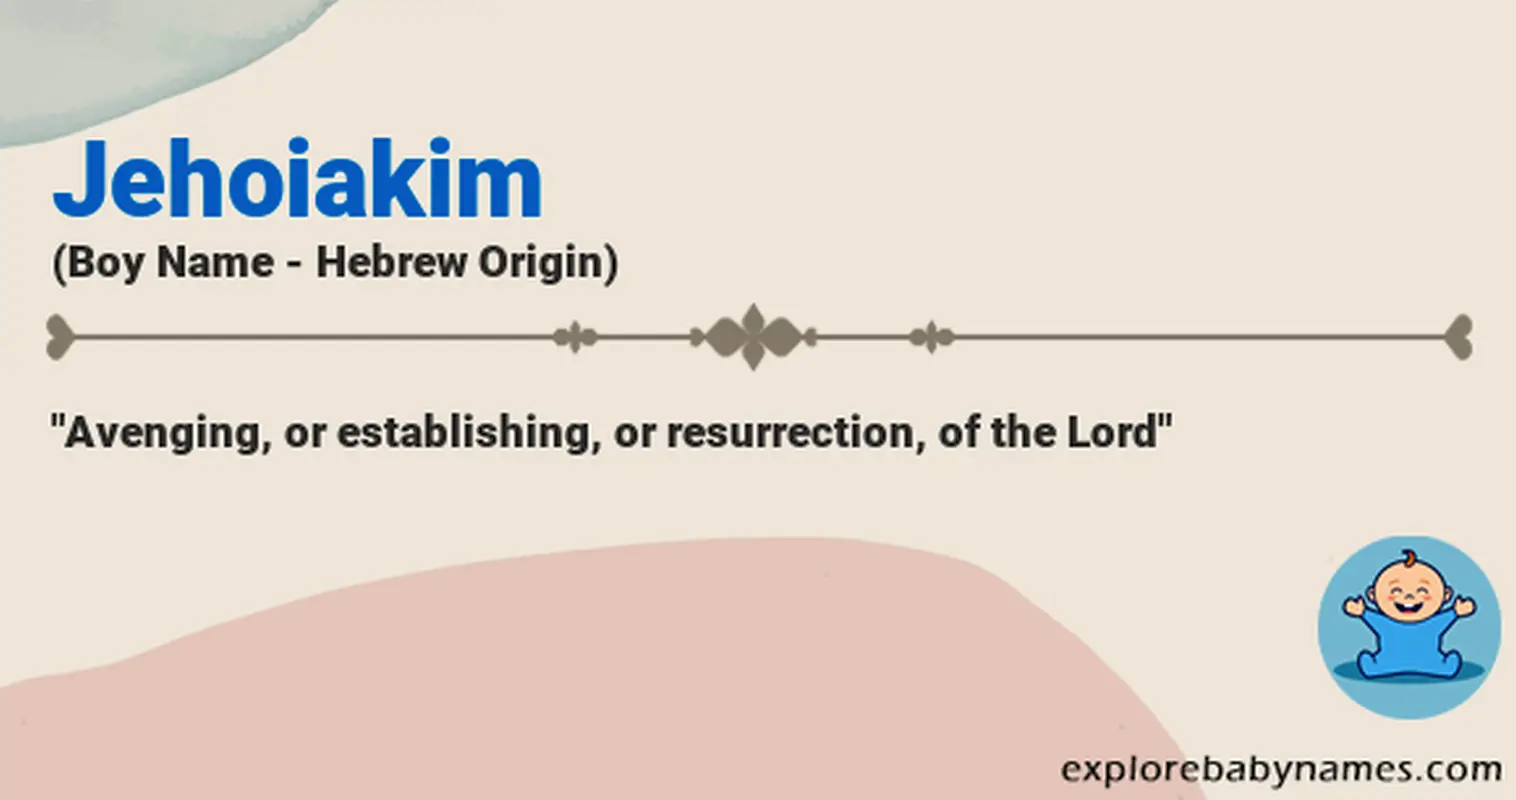 Meaning of Jehoiakim